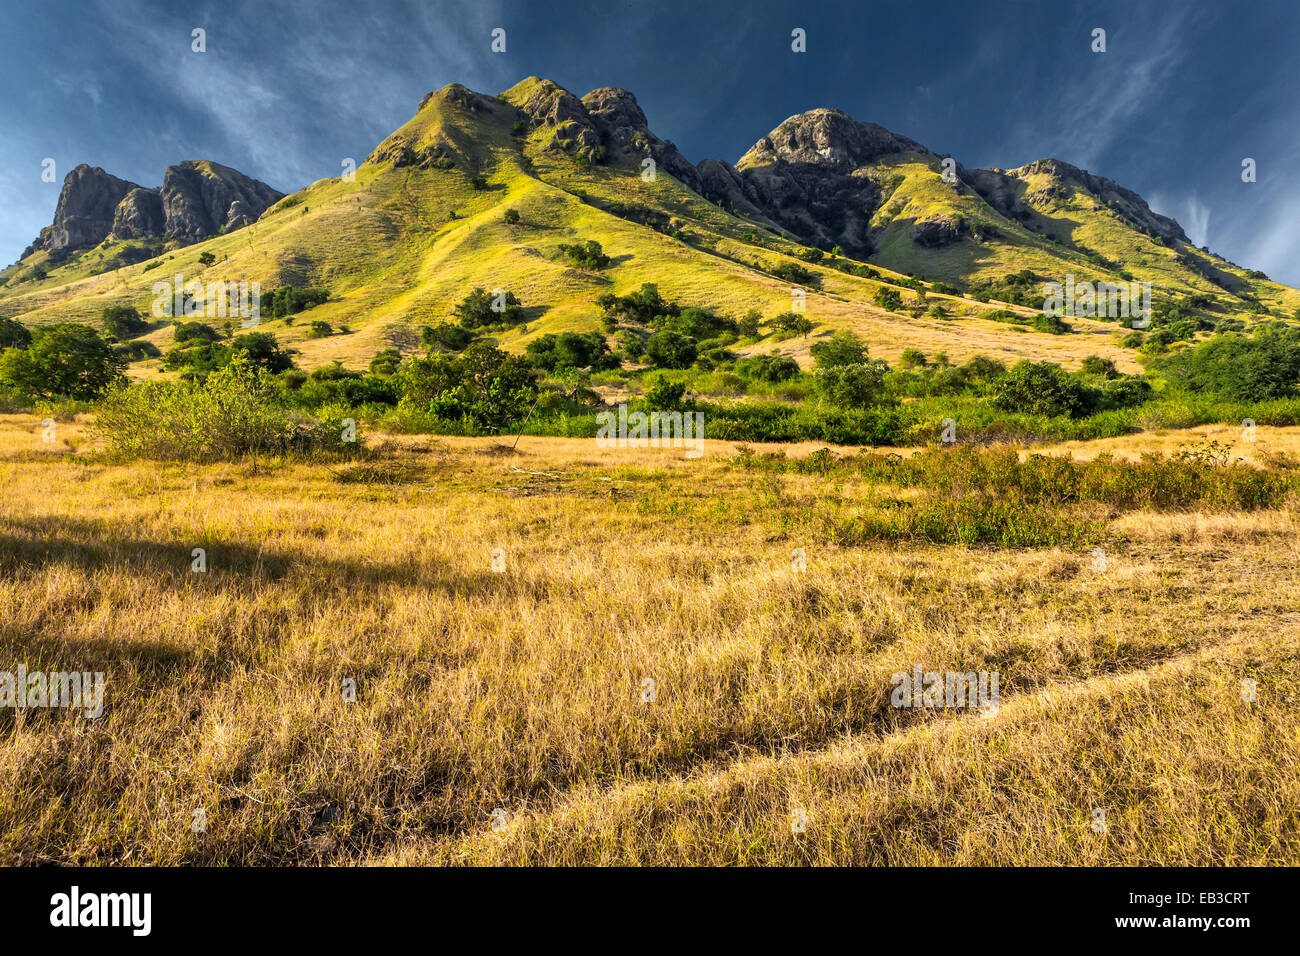 Indonesia, Flores Island, View of mountain from across withered grass of tropical savannah Stock Photo